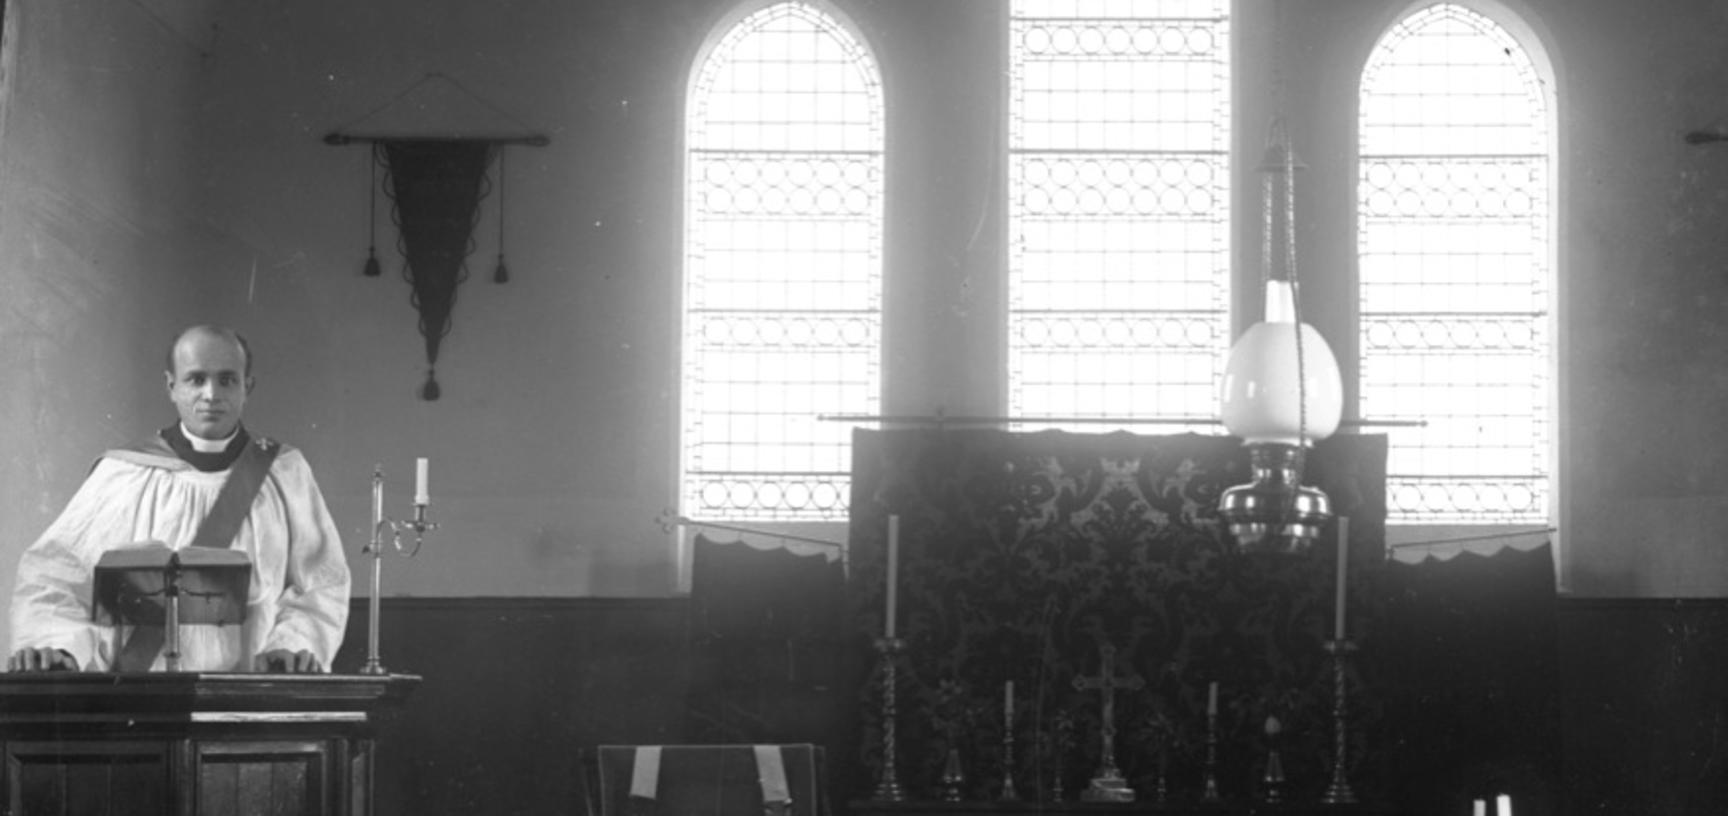 Glass negative showing Harley standing in the pulpit of an unidentified church.